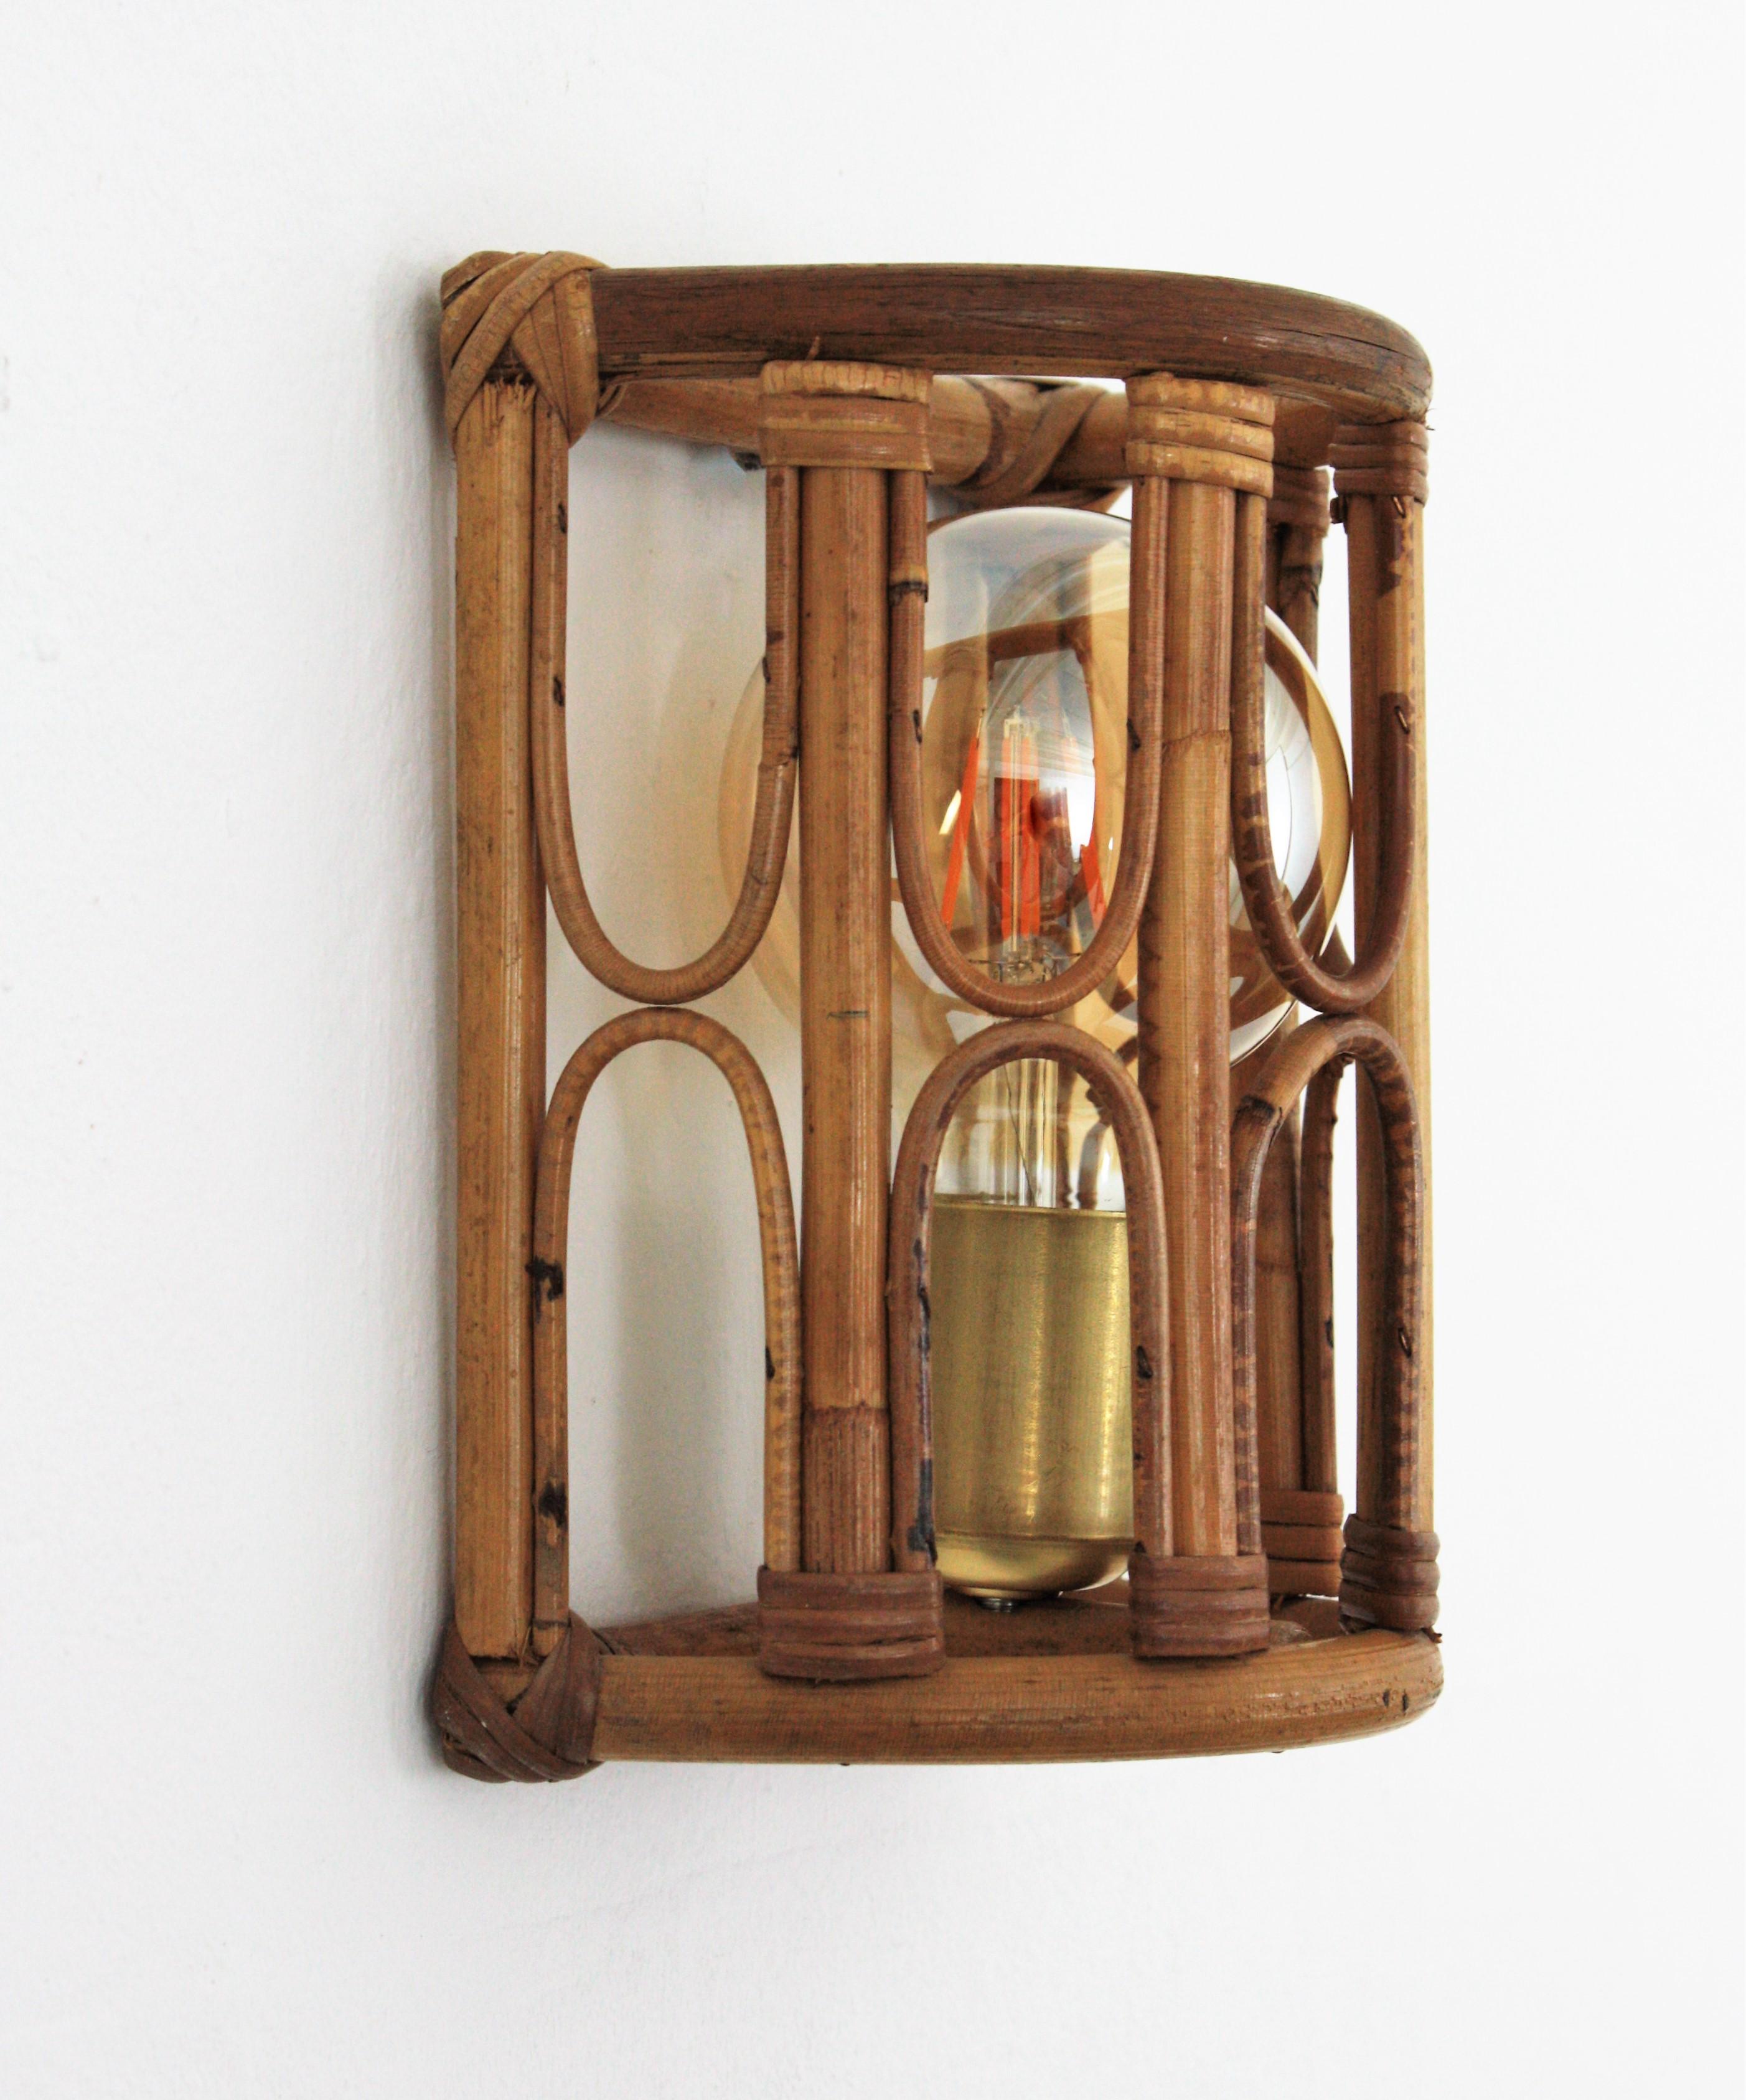 Rattan Bamboo Italian Modernist Wall Sconce, 1960s For Sale 2